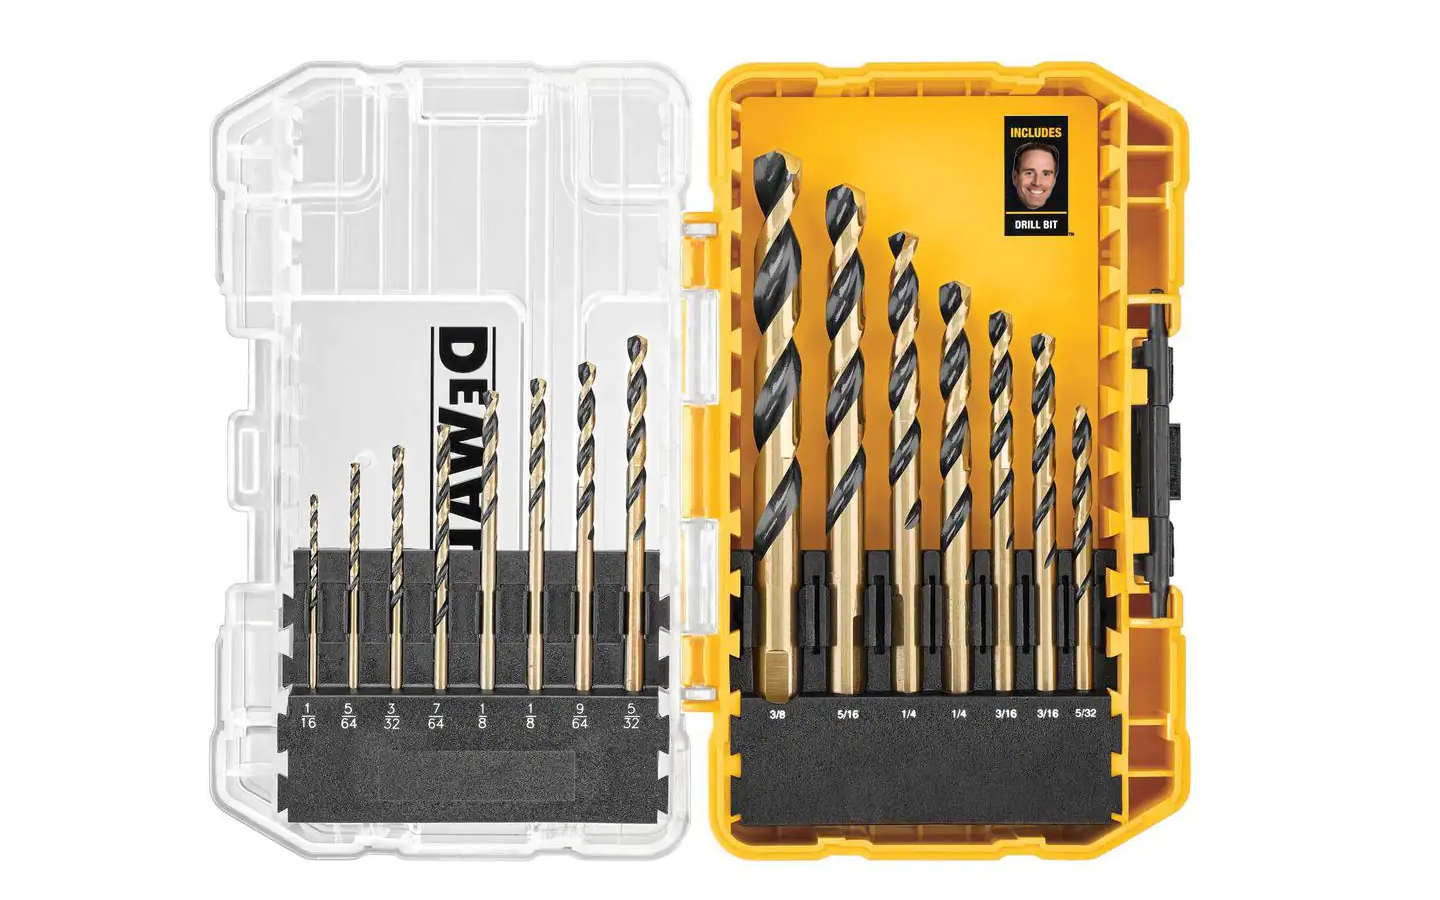 lincoln-branded drill bits